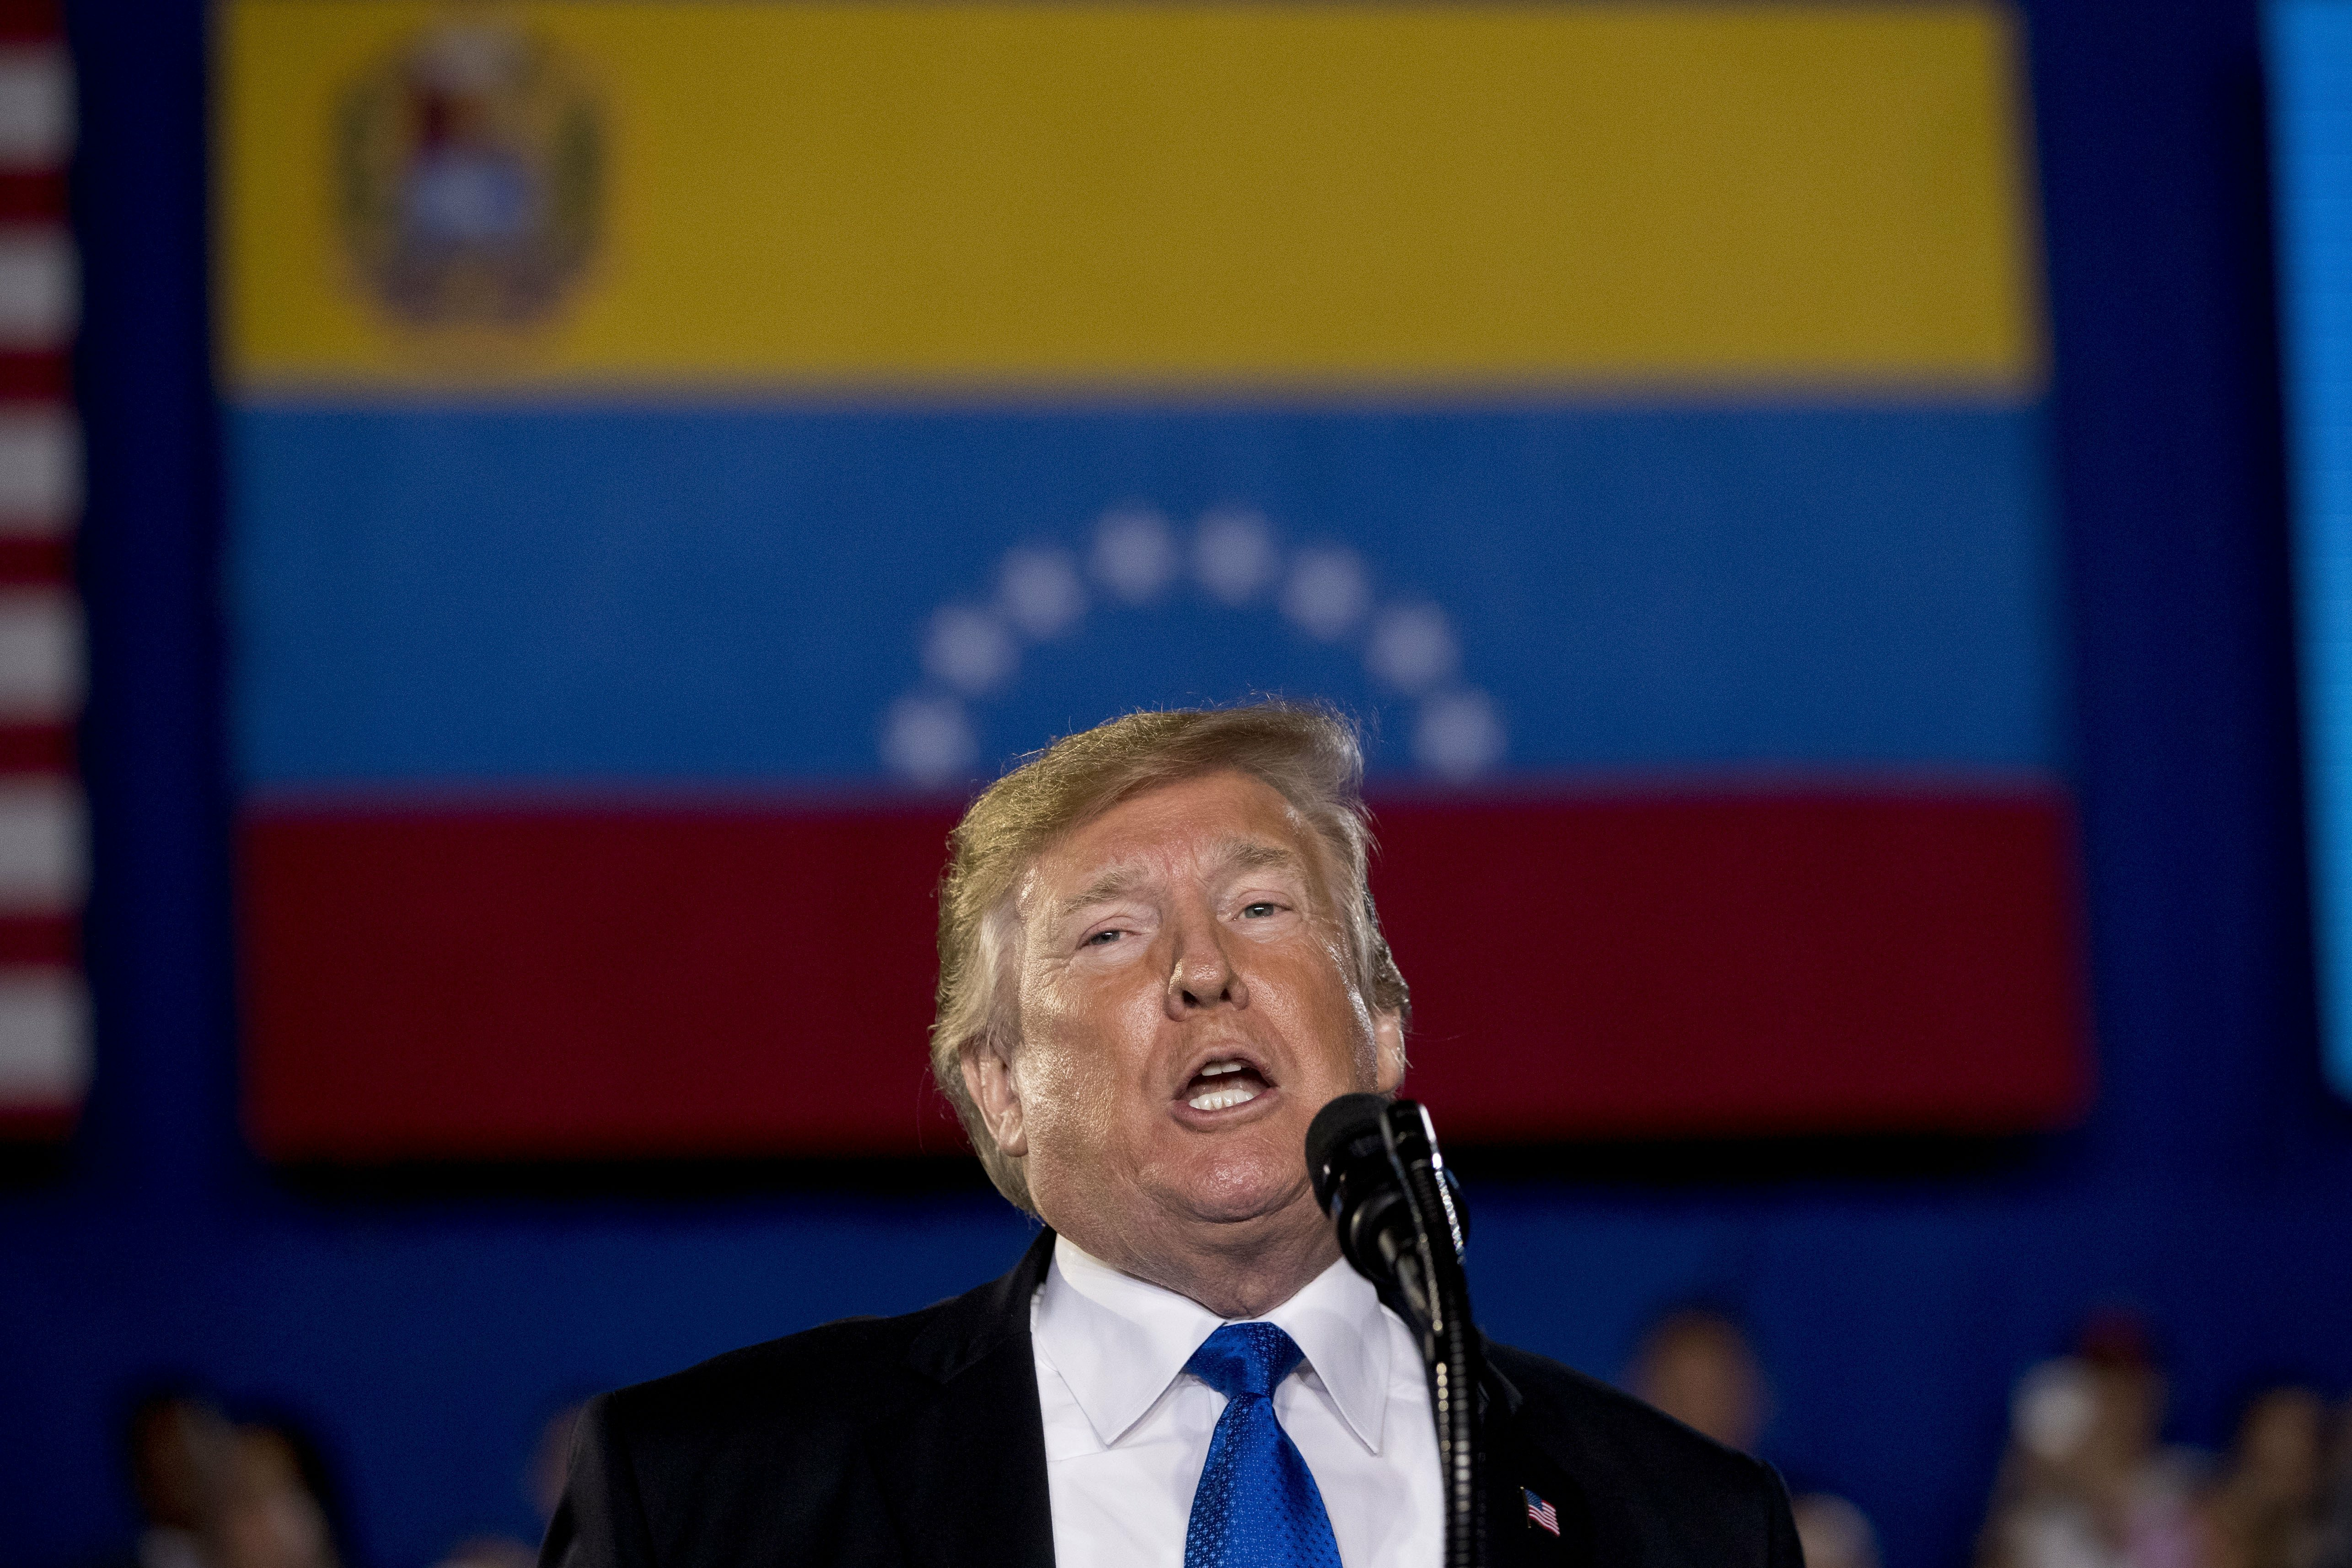 Trump in Florida rips Venezuelan socialism and previews a 2020 theme. Plus sanctuary cities, ACLU turmoil and spring training